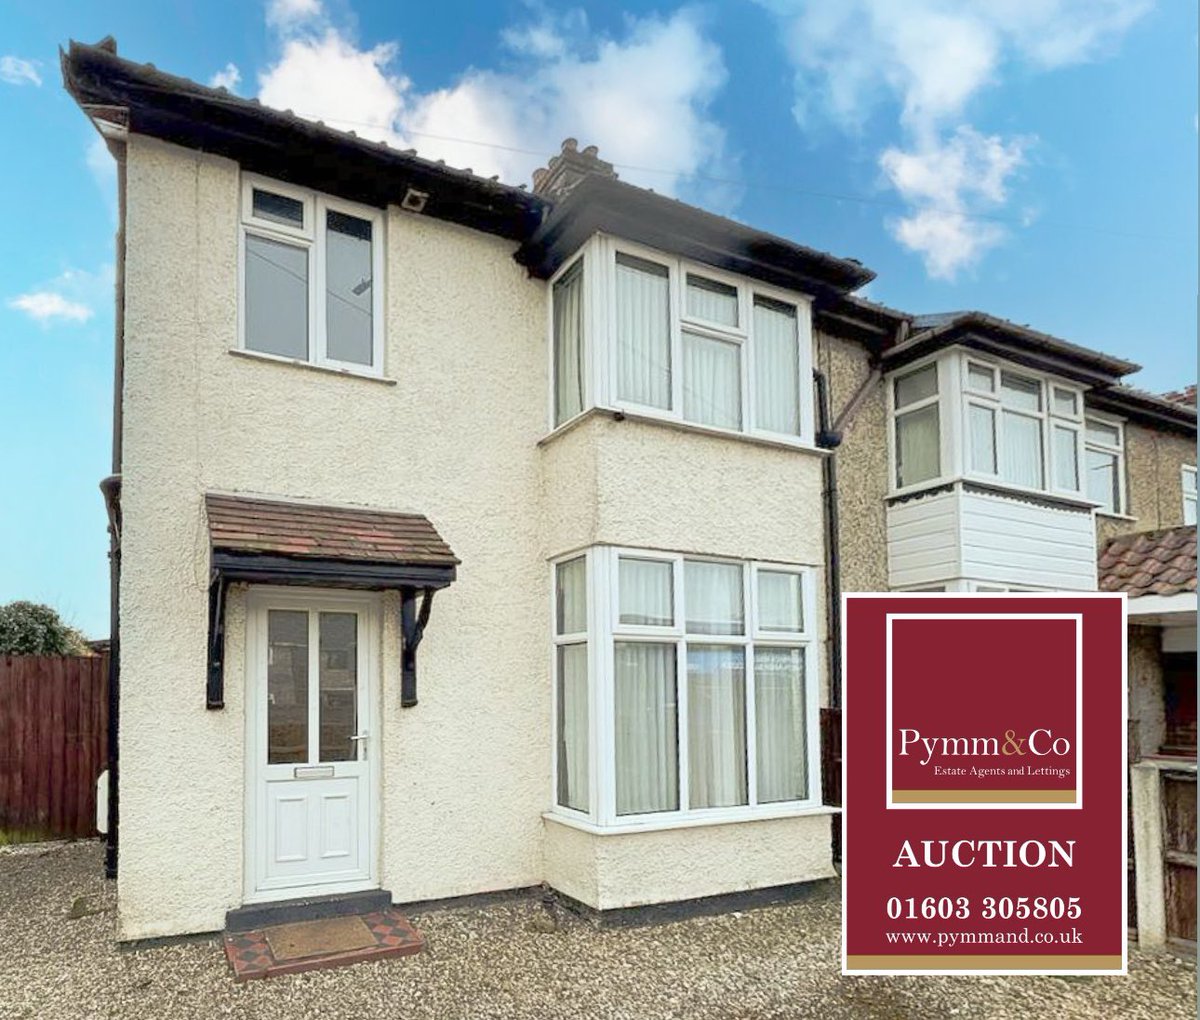 Property Auction, this Thursday 9th May 12-3pm Guide: 185-195k a great investment opportunity! pymmandcoauctions.co.uk/lot/details/11… 📱01603 305805 @pymmandco #propertyauction #auction #investment #norwich #rentalincome #refurb #flip